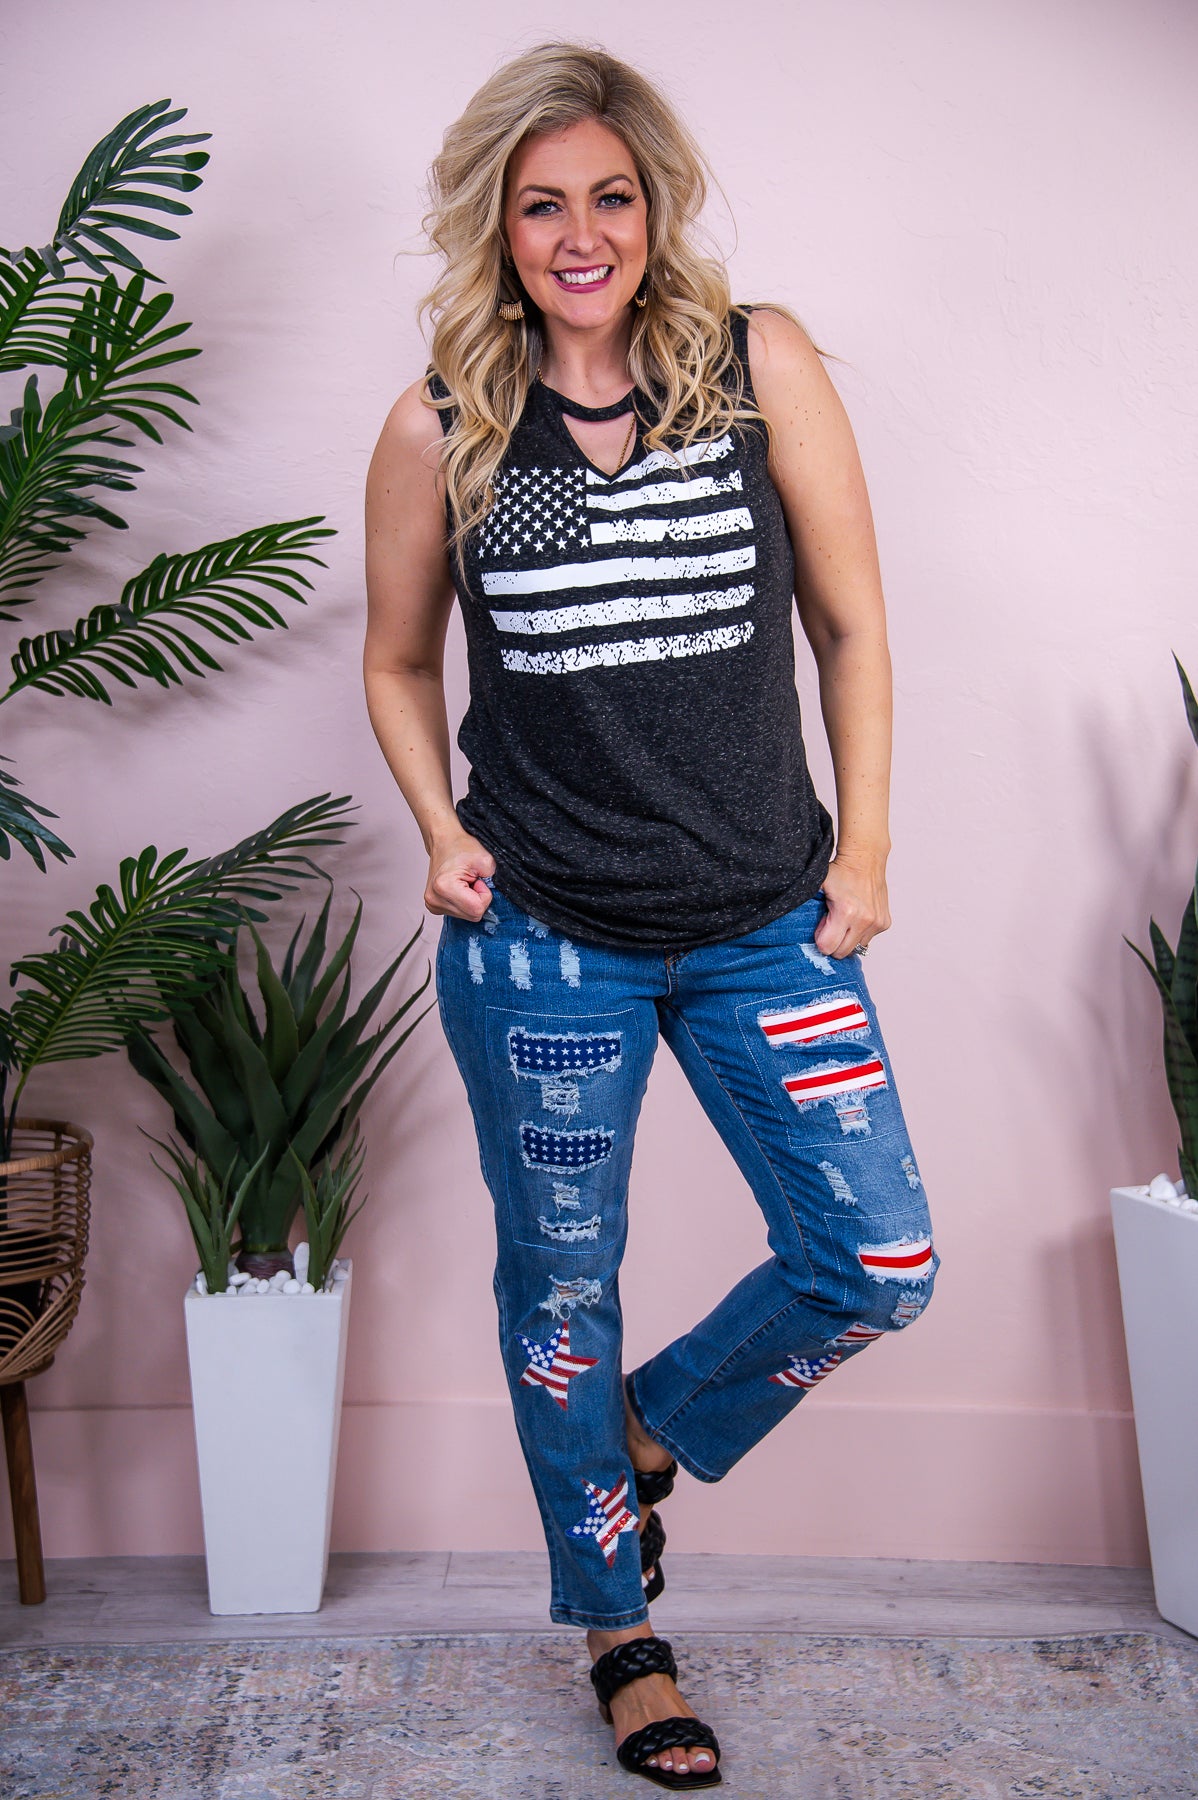 Give Me Liberty Heather Black/White Distressed American Flag Top - T9634HBK